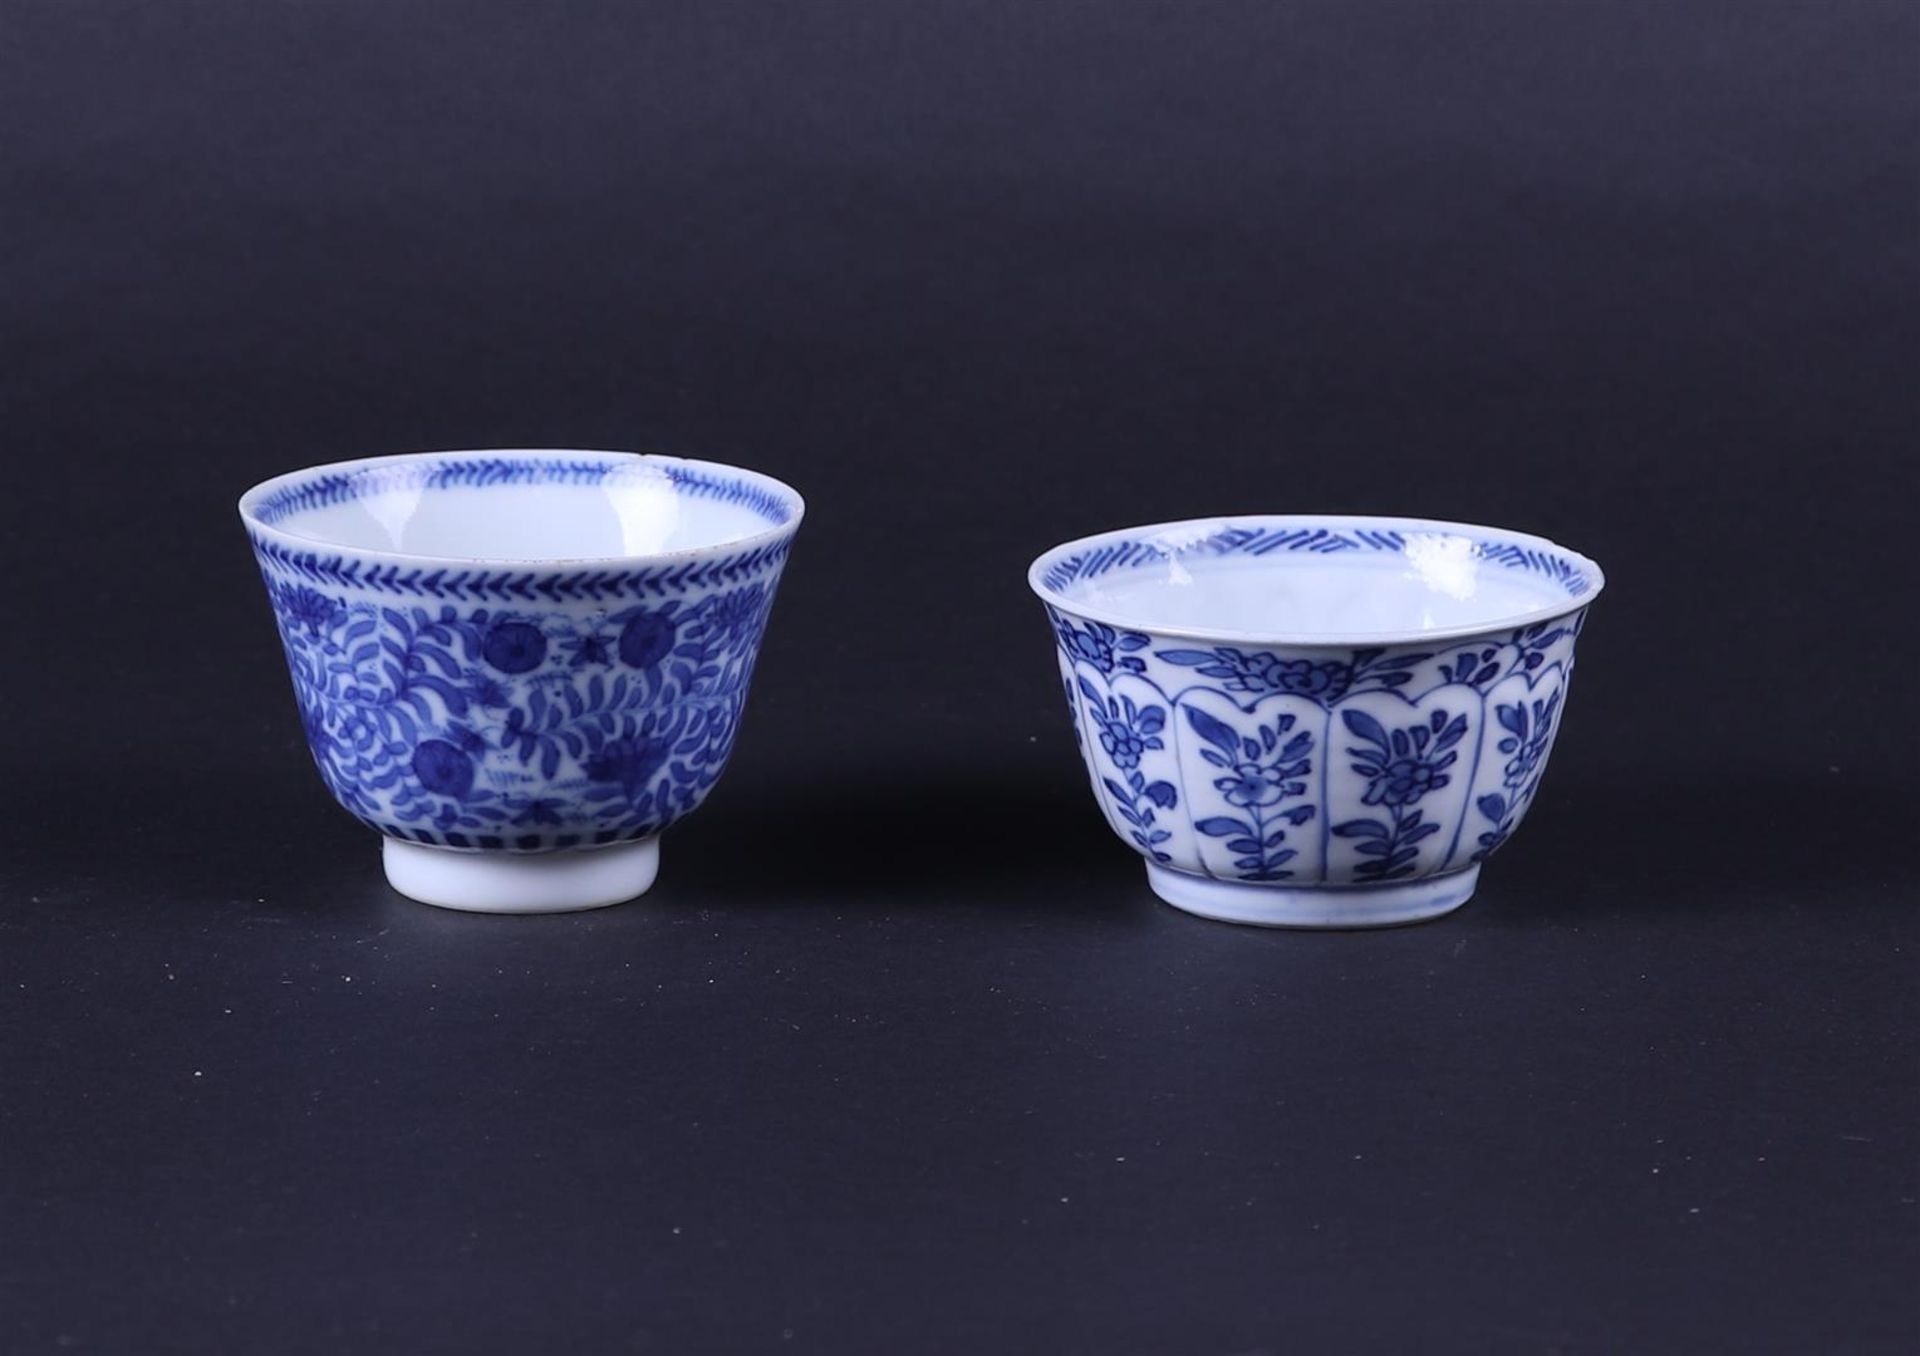 A lot of two porcelain bowls with floral decor. China, 18th century.